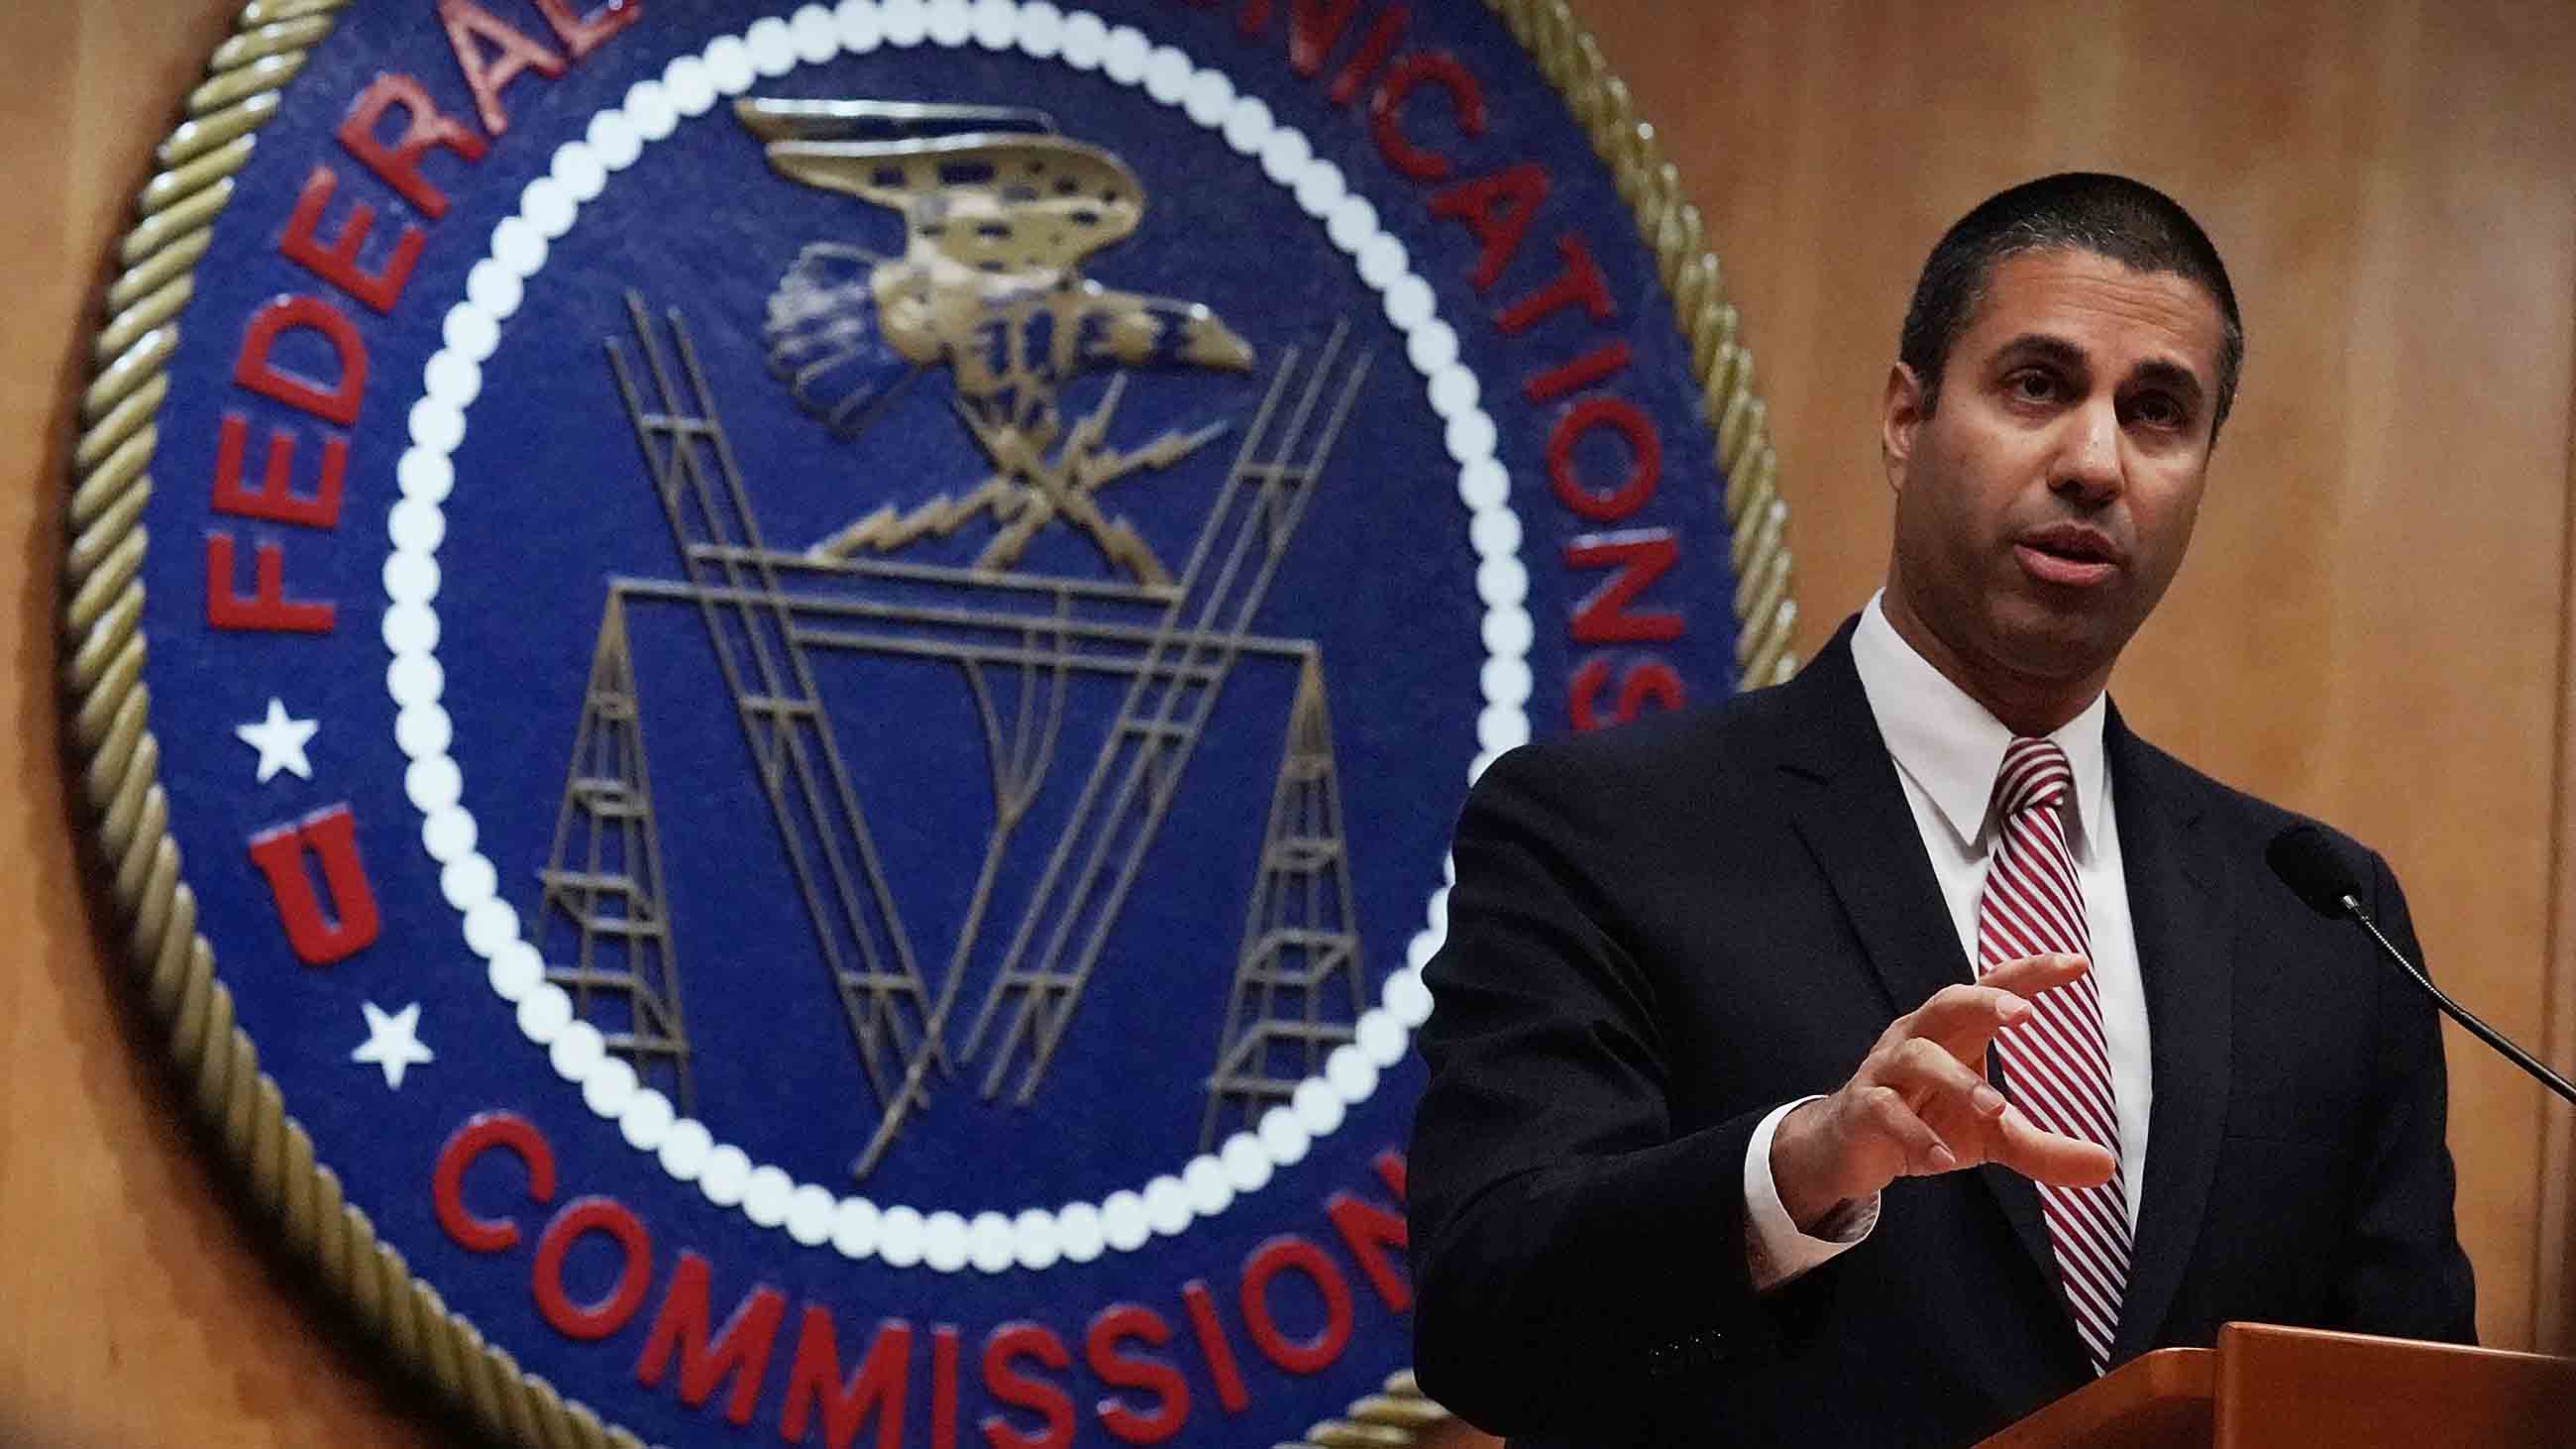 Federal Communications Commission Chairman Ajit Pai speaks to members of the media after a commission meeting December 14, 2017 in Washington, DC. FCC has voted to repeal its net neutrality rules at the meeting.